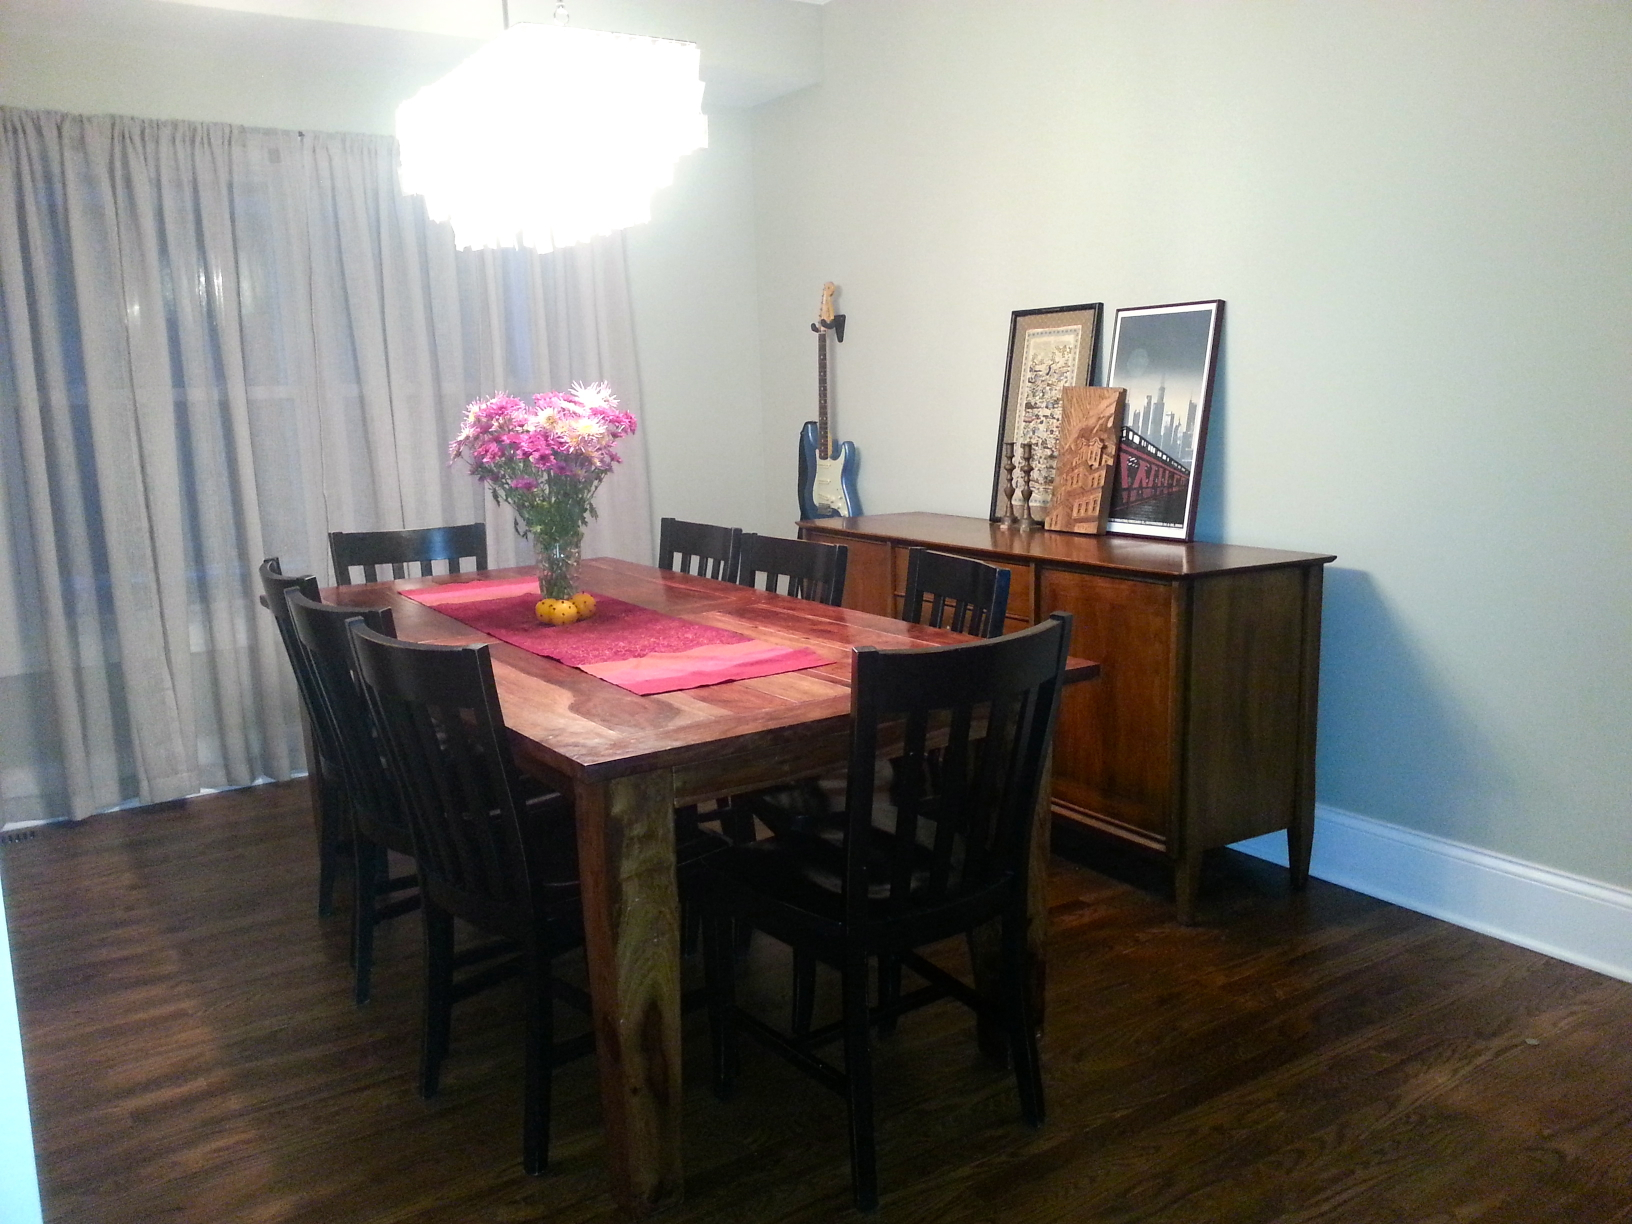 a dining room with a dining table, chairs and flowers on it